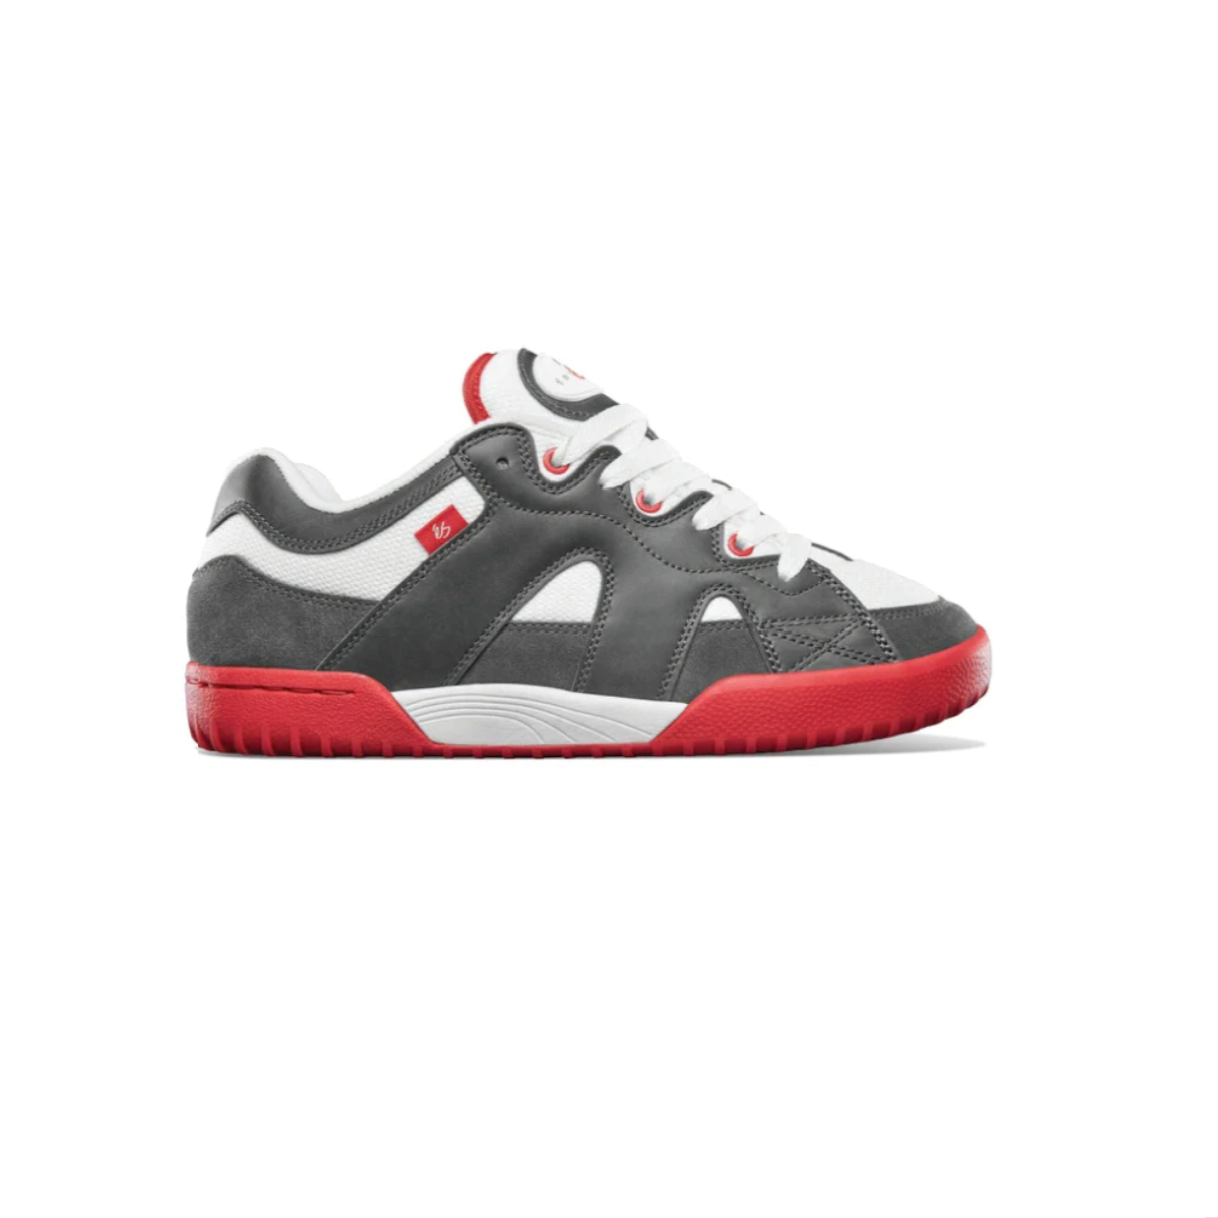 ES 197 Grey White Red One Nine Seven Shoes 197